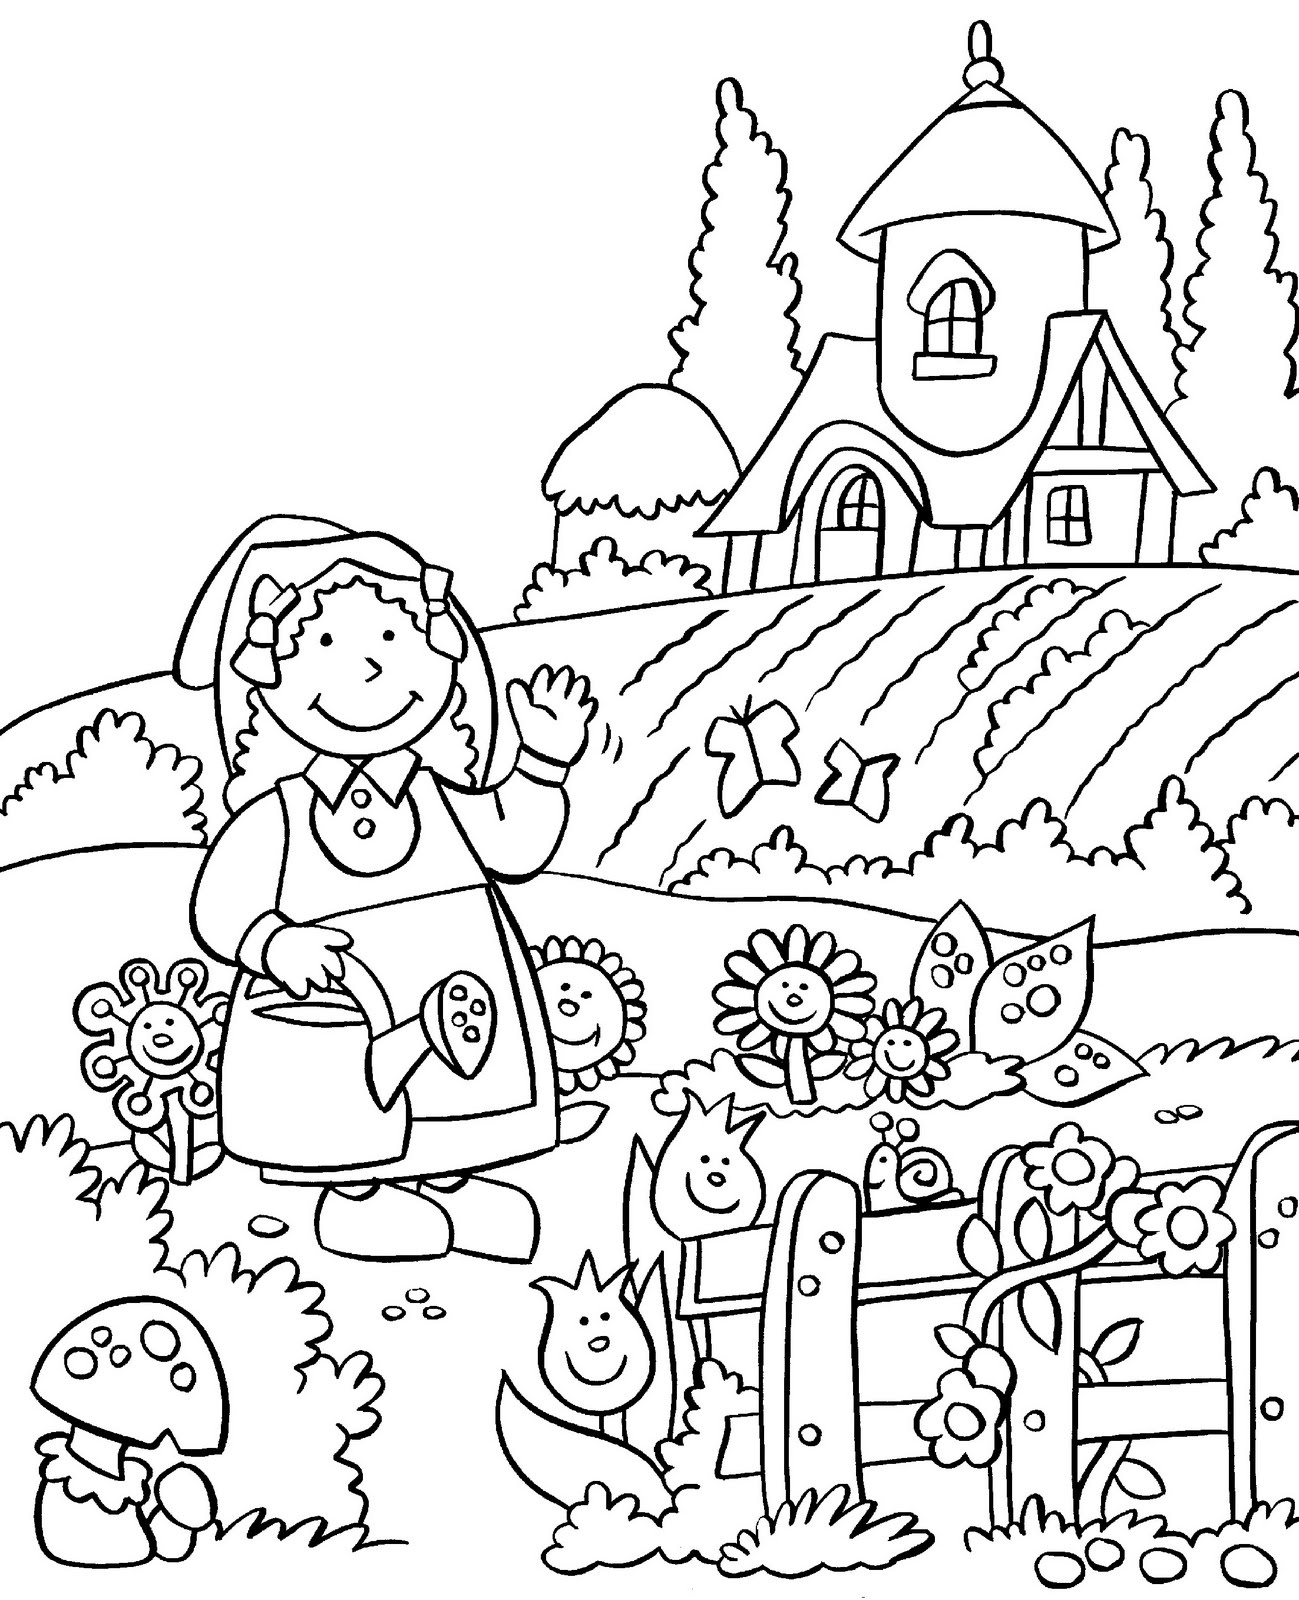 colouring pages garden inkspired musings it39s hard to be green colouring pages garden 